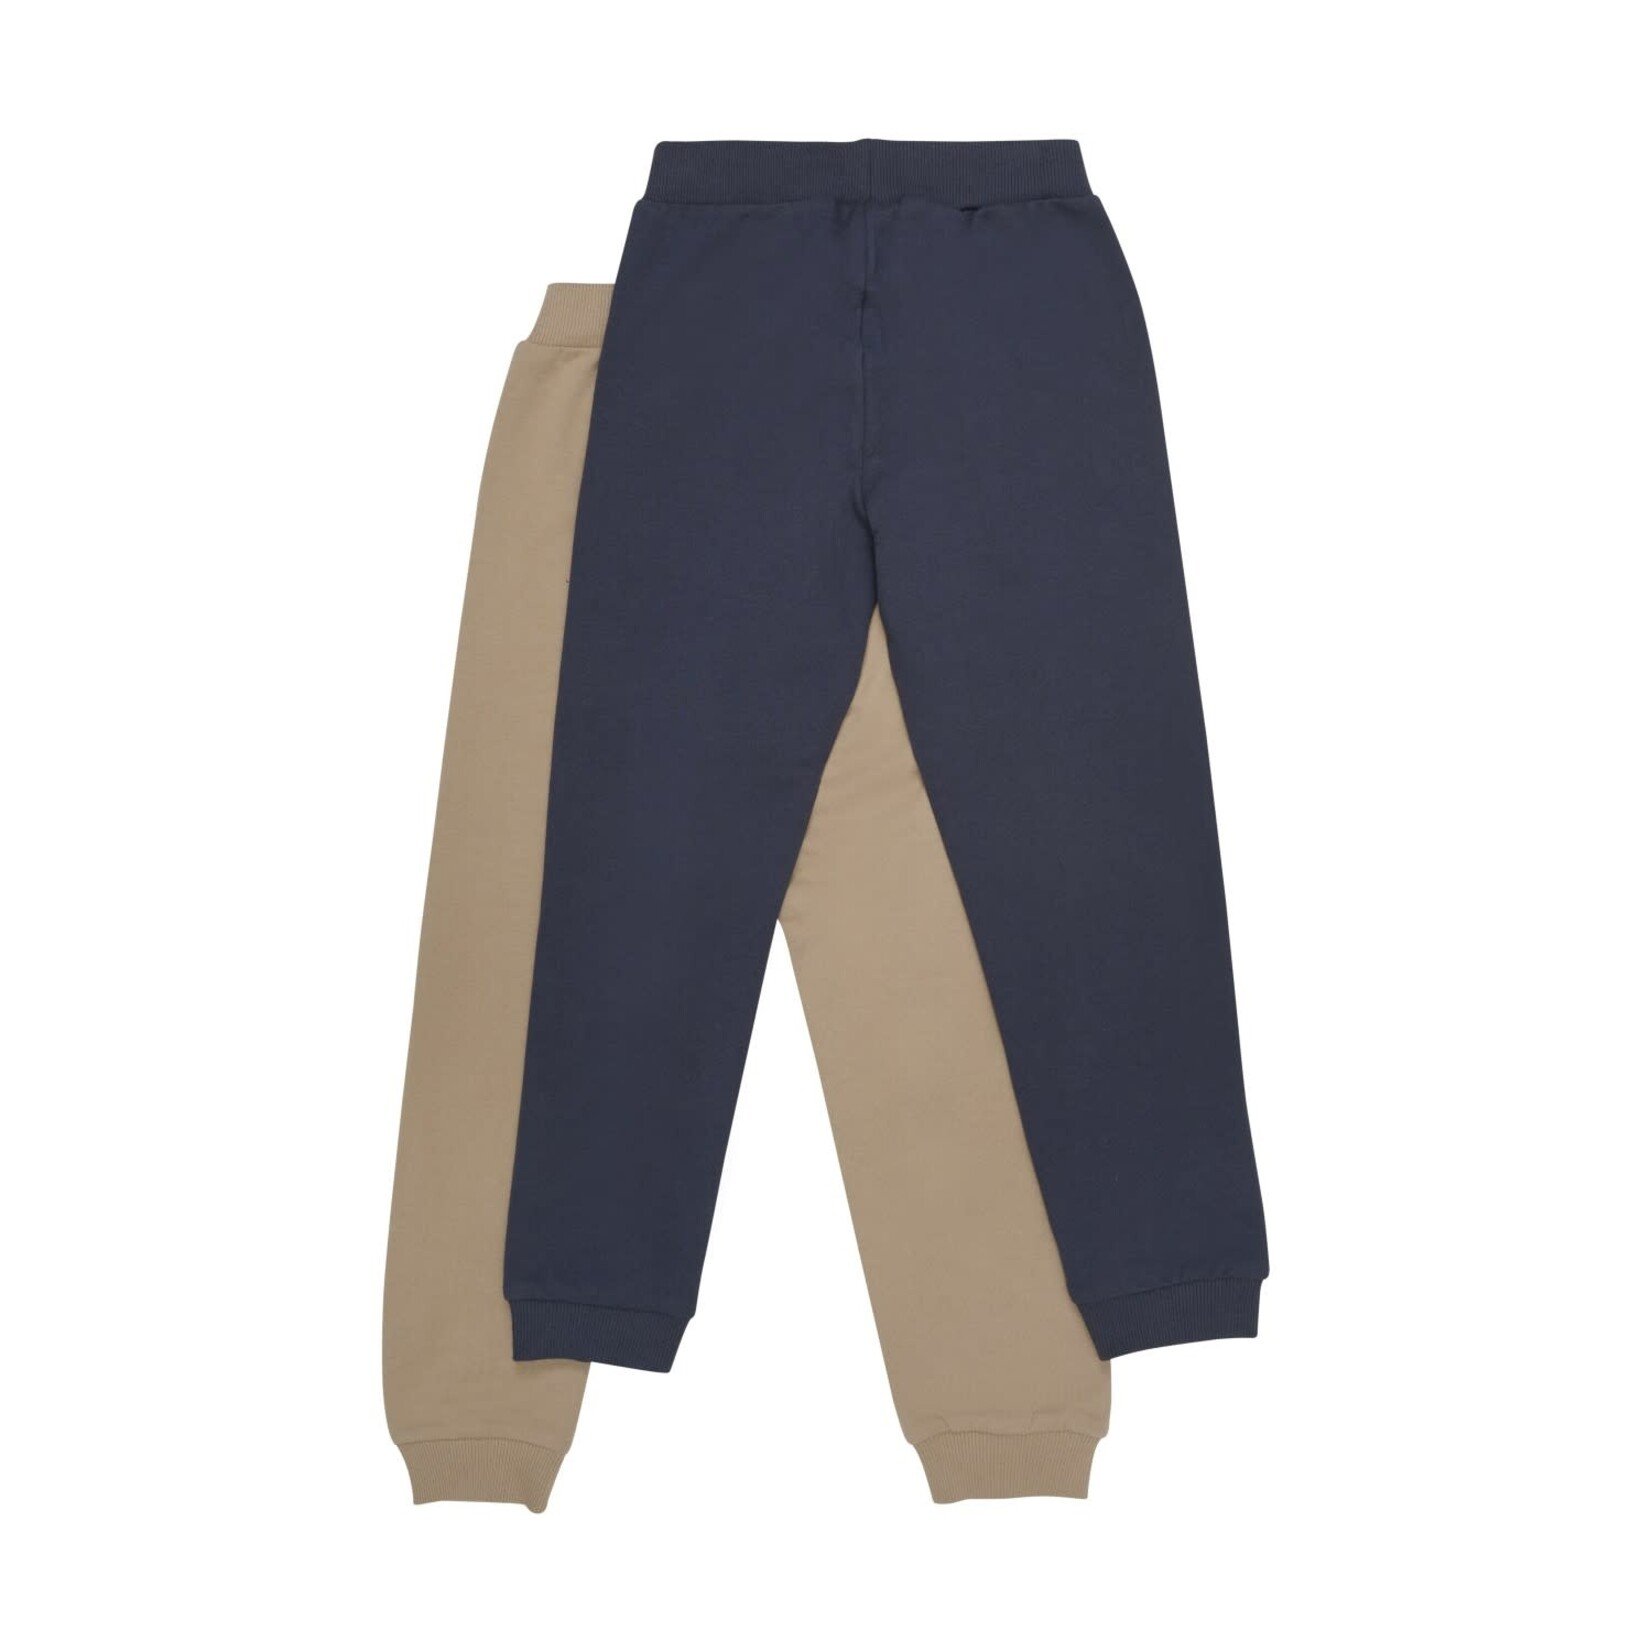 Minymo MINYMO - Set of 2 jogging pants in navy blue and beige brown organic cotton